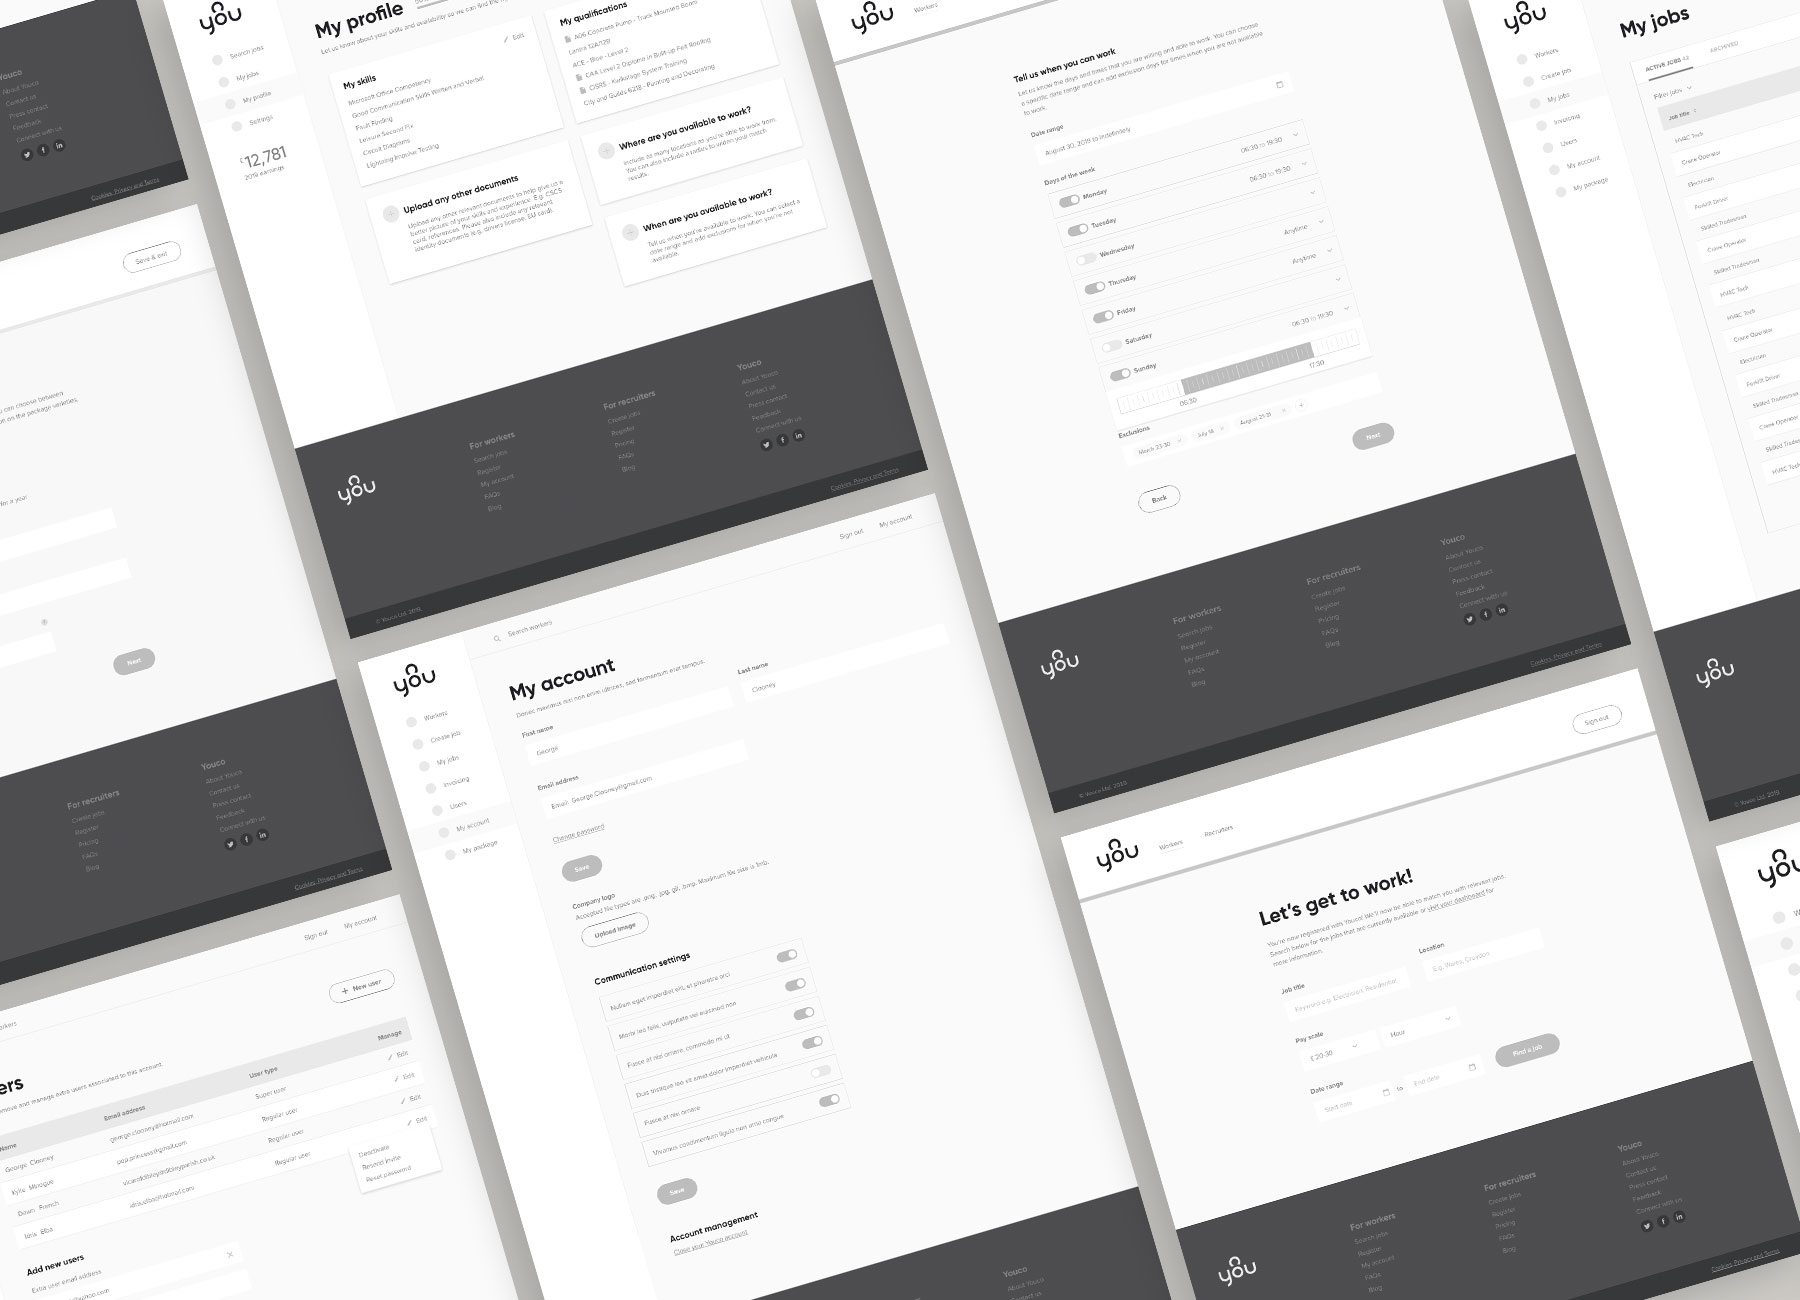 Youco wireframes